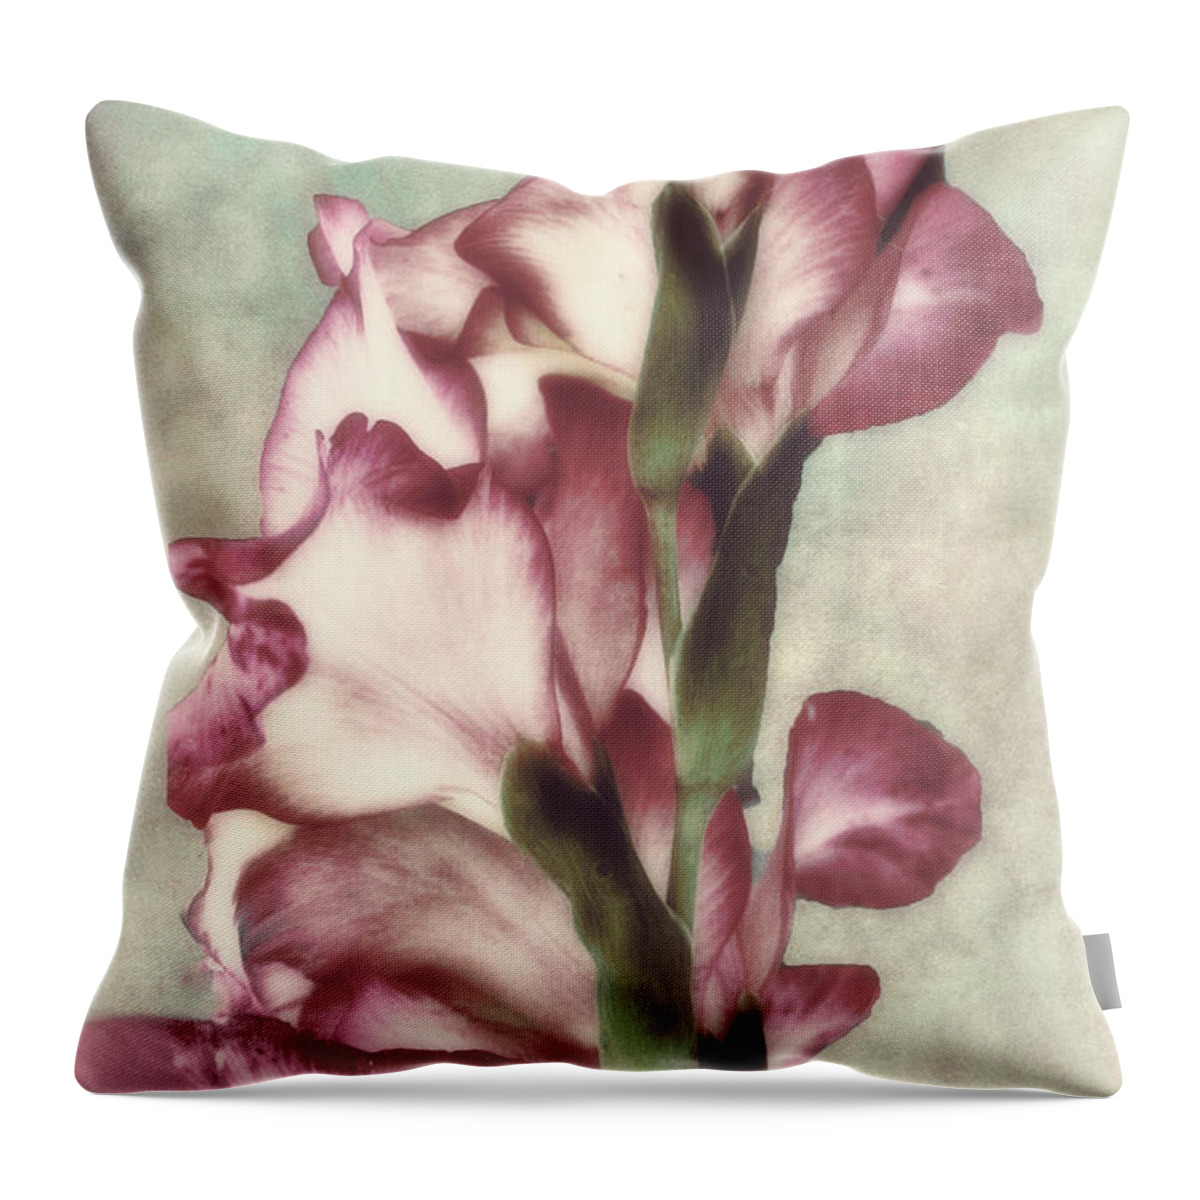 Gladiola Throw Pillow featuring the painting Gladiola by Mindy Sommers